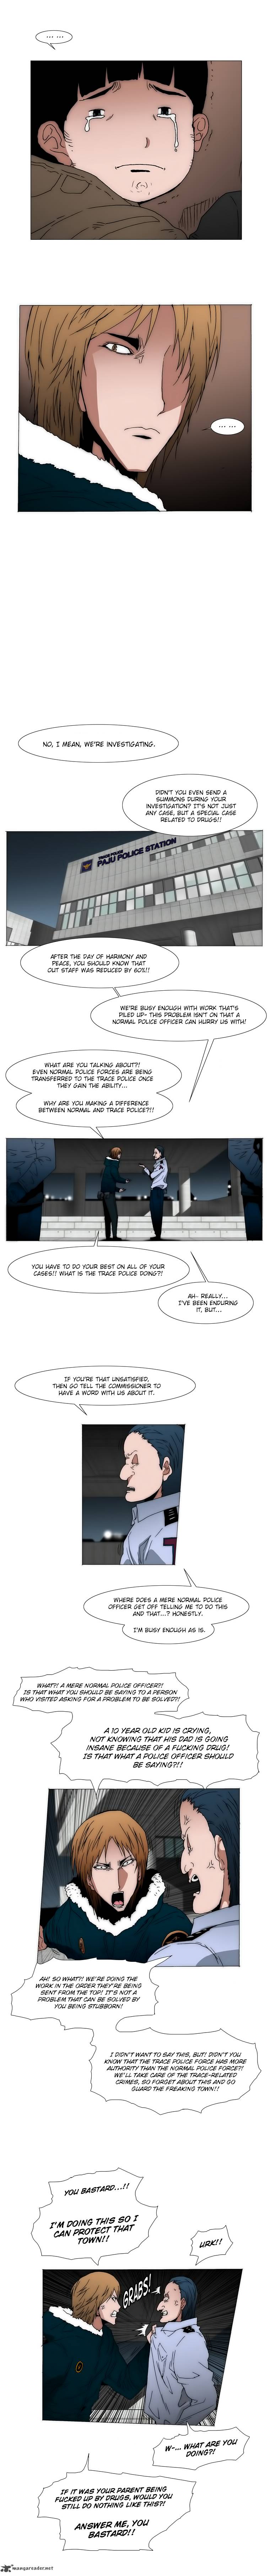 Trace 20 Chapter 6 Page 5